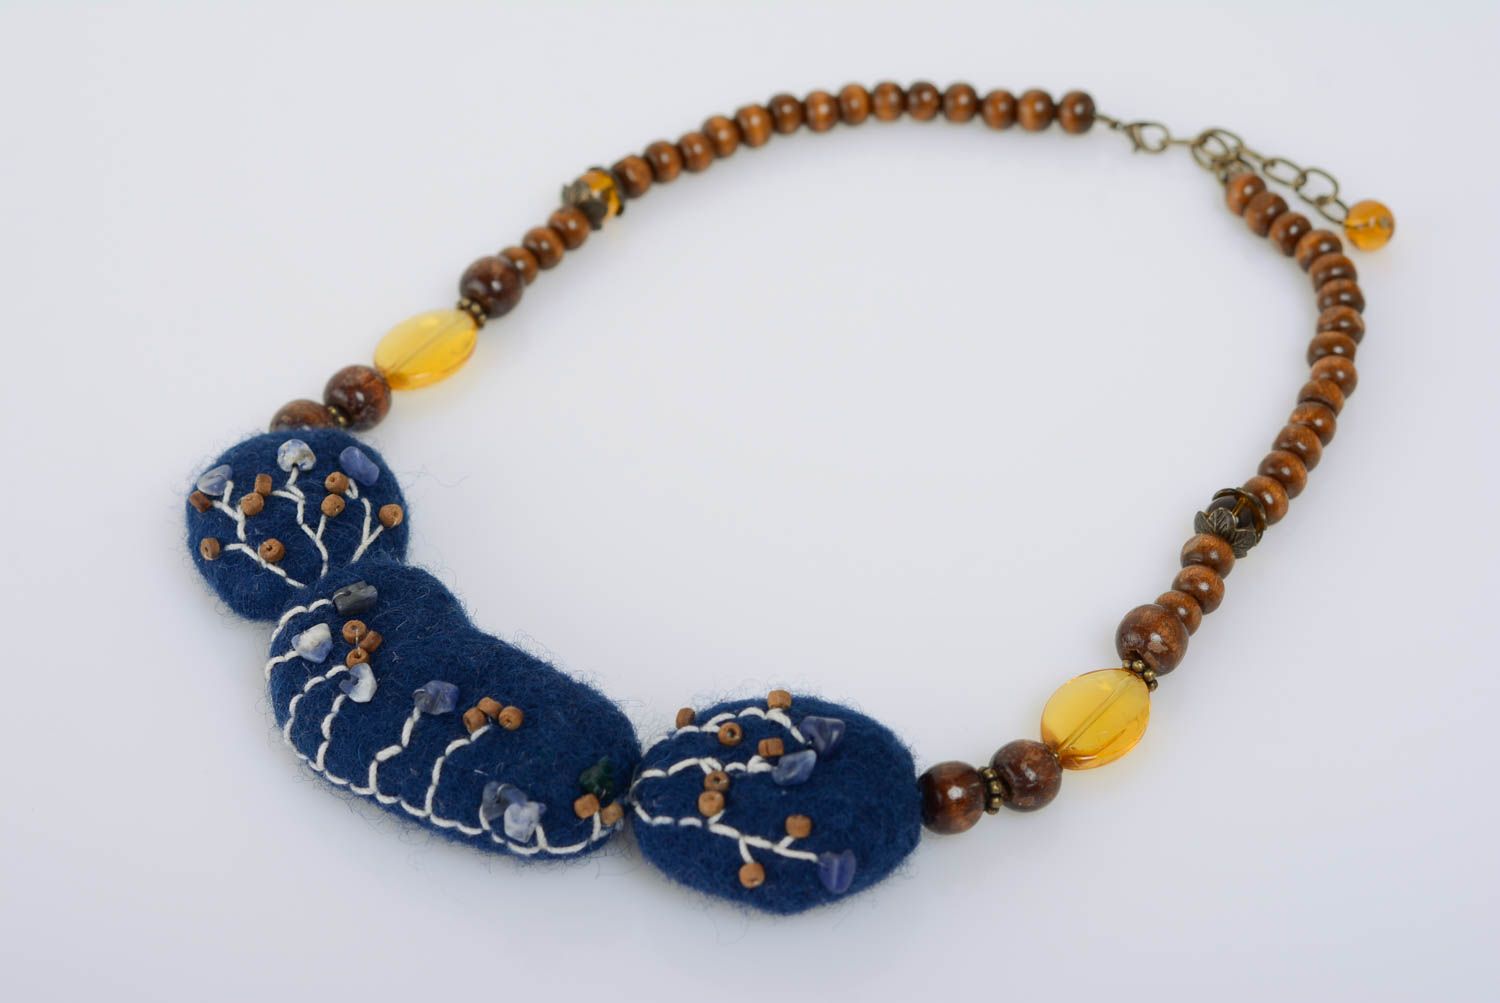 Handmade designer necklace with blue wool felted and wooden beads for women photo 1